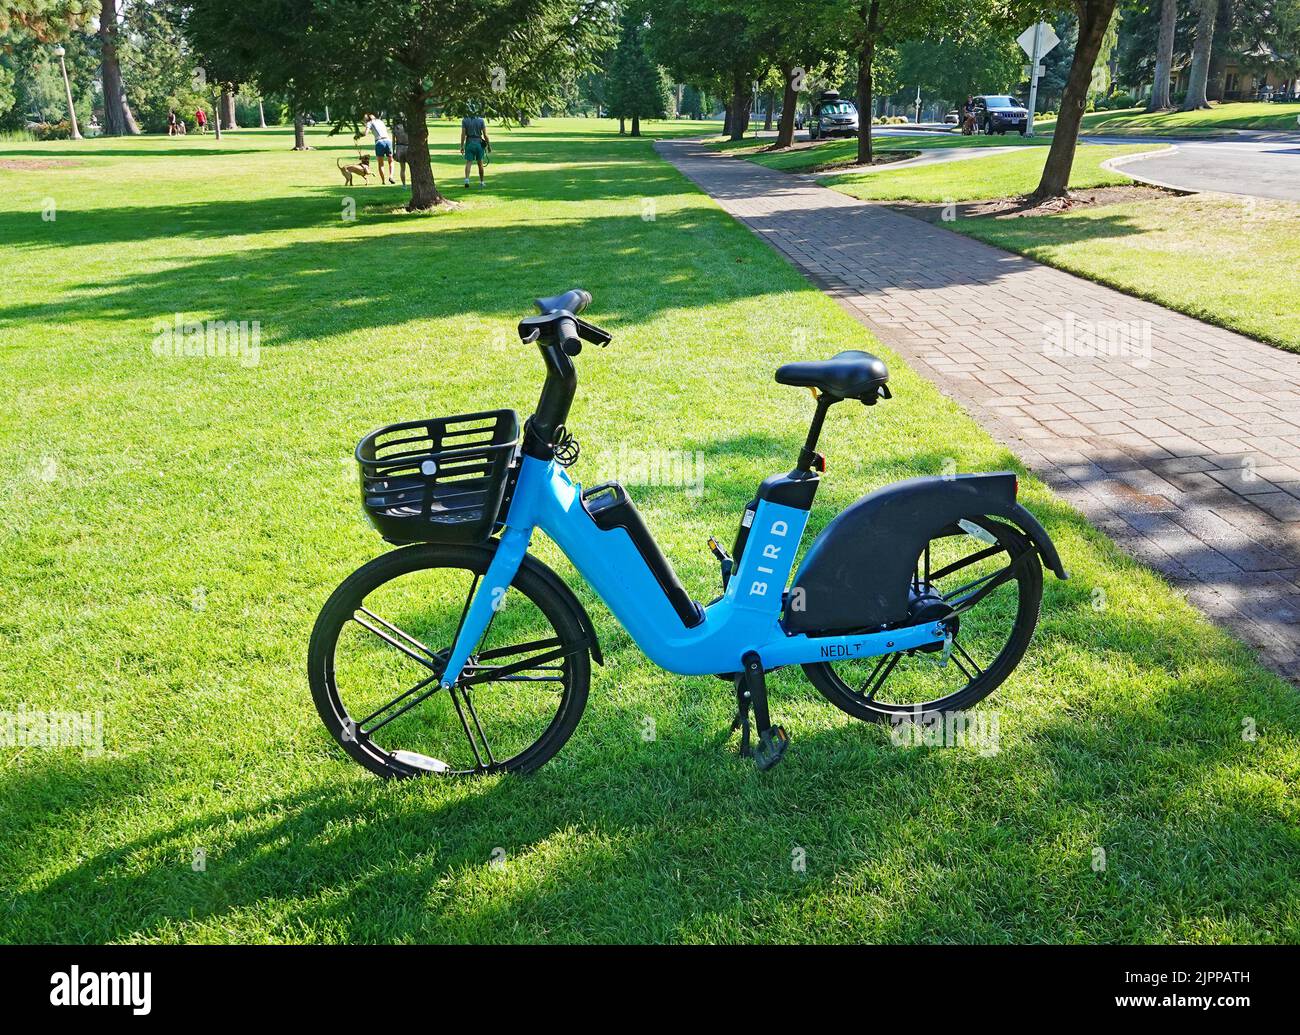 An electric rental bicycle parked in a city park in Bend, Oregon. Stock Photo